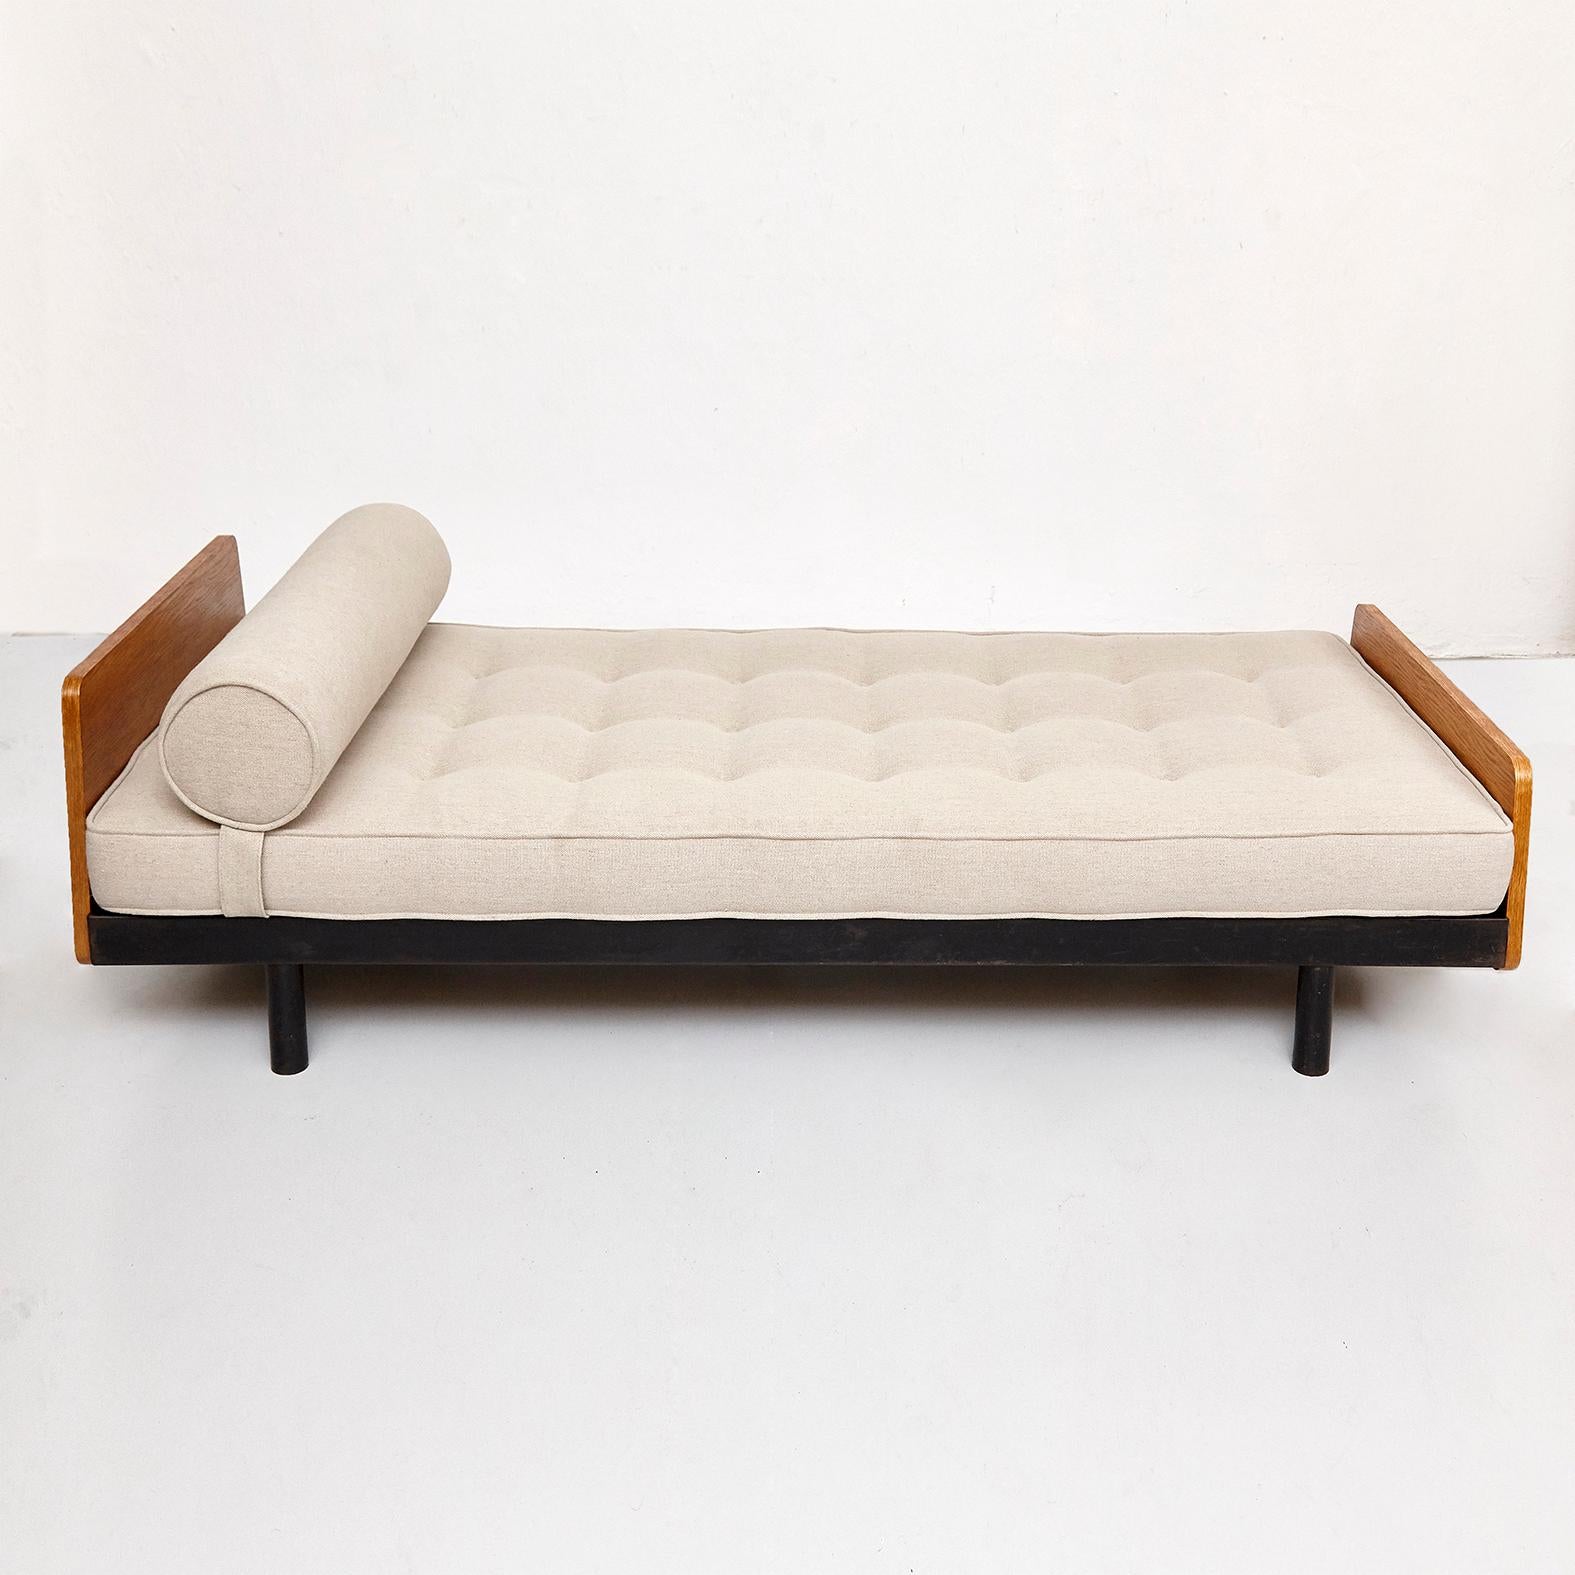 Mid-20th Century Jean Prouve Daybed in Black Metal and Wood, circa 1950